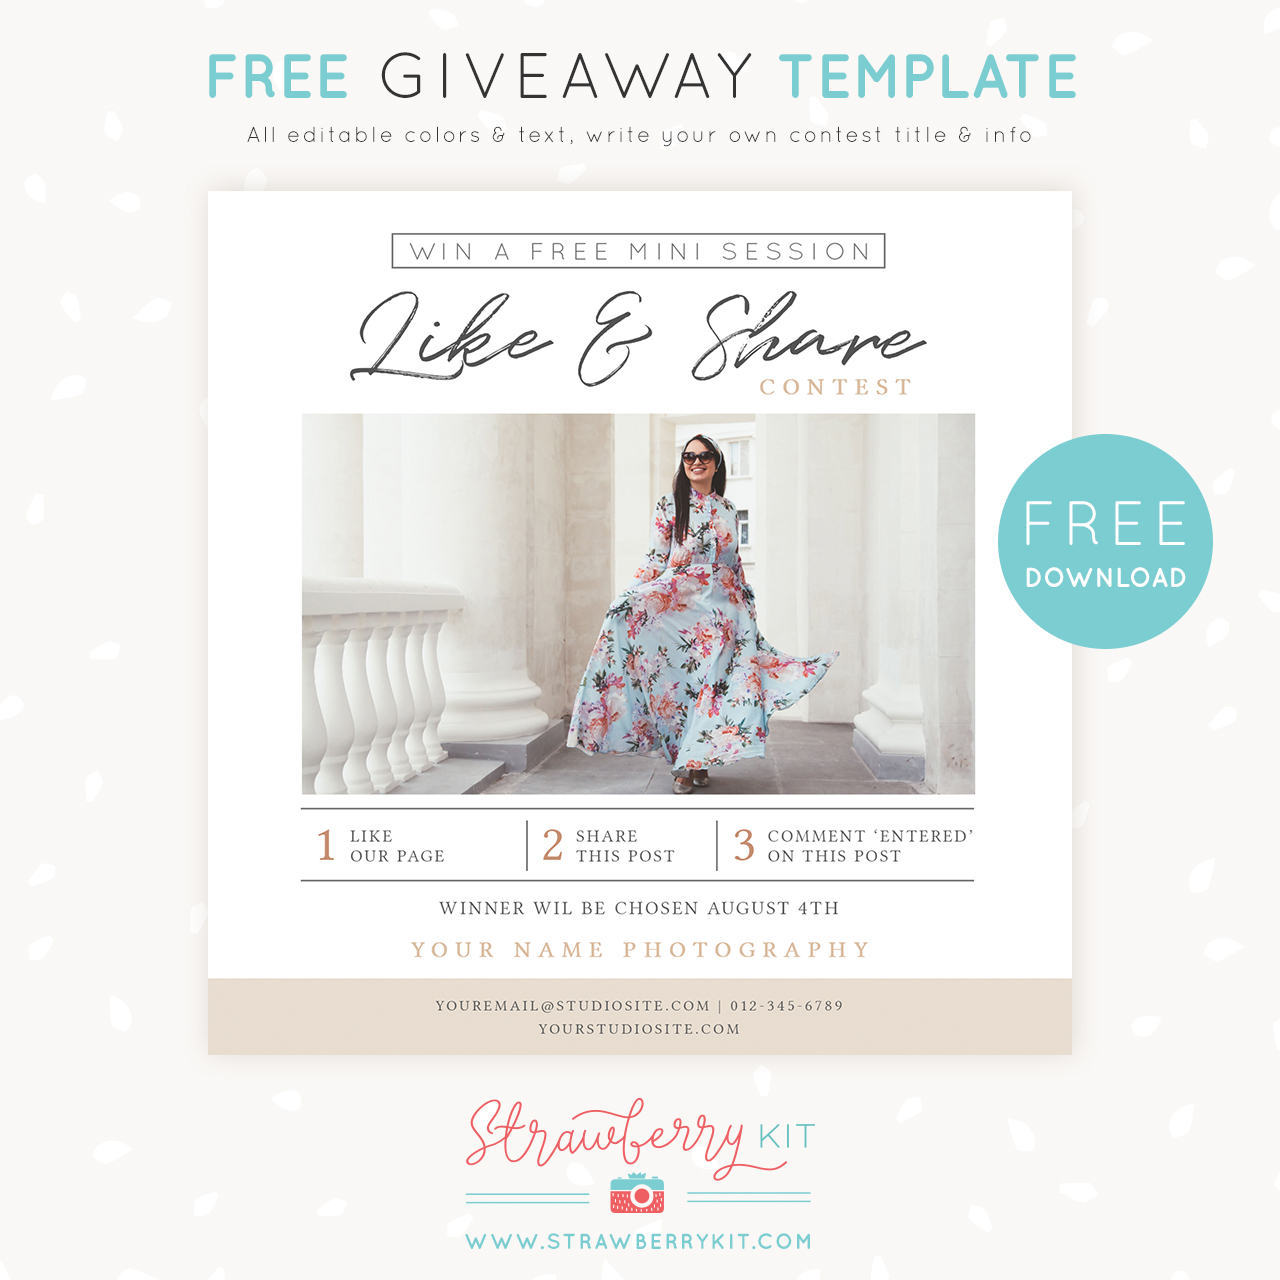 Free Photography Marketing Template Giveaway Share Win Strawberry Kit